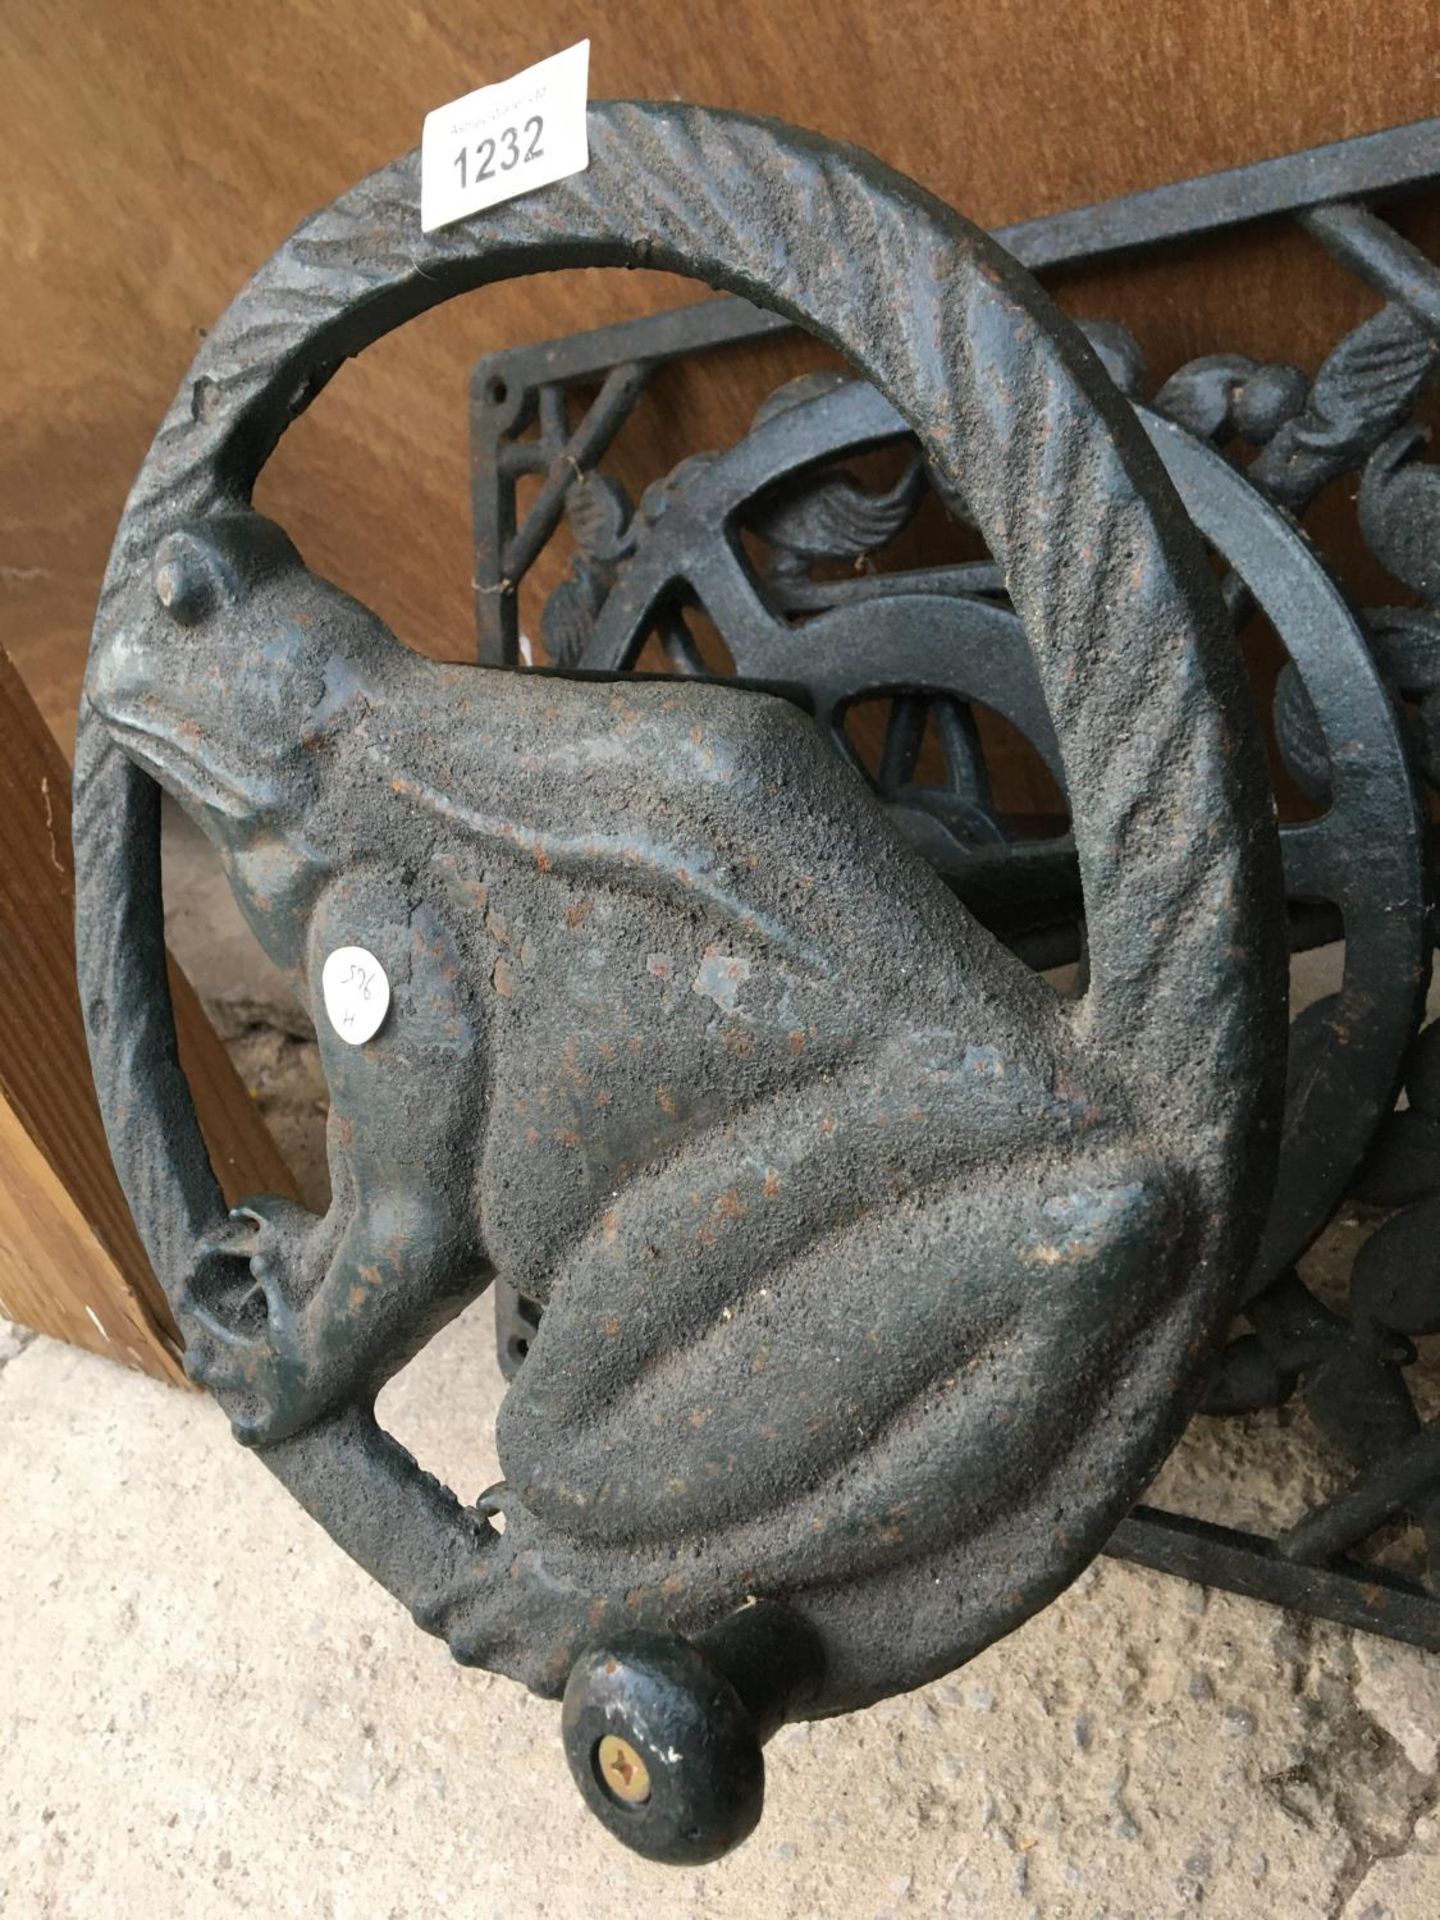 A VINTAGE STYLE CAST HOSE REEL WITH FROG DESIGN AND TURNING HANDLE, CAN BE WALL MOUNTED - Image 3 of 3